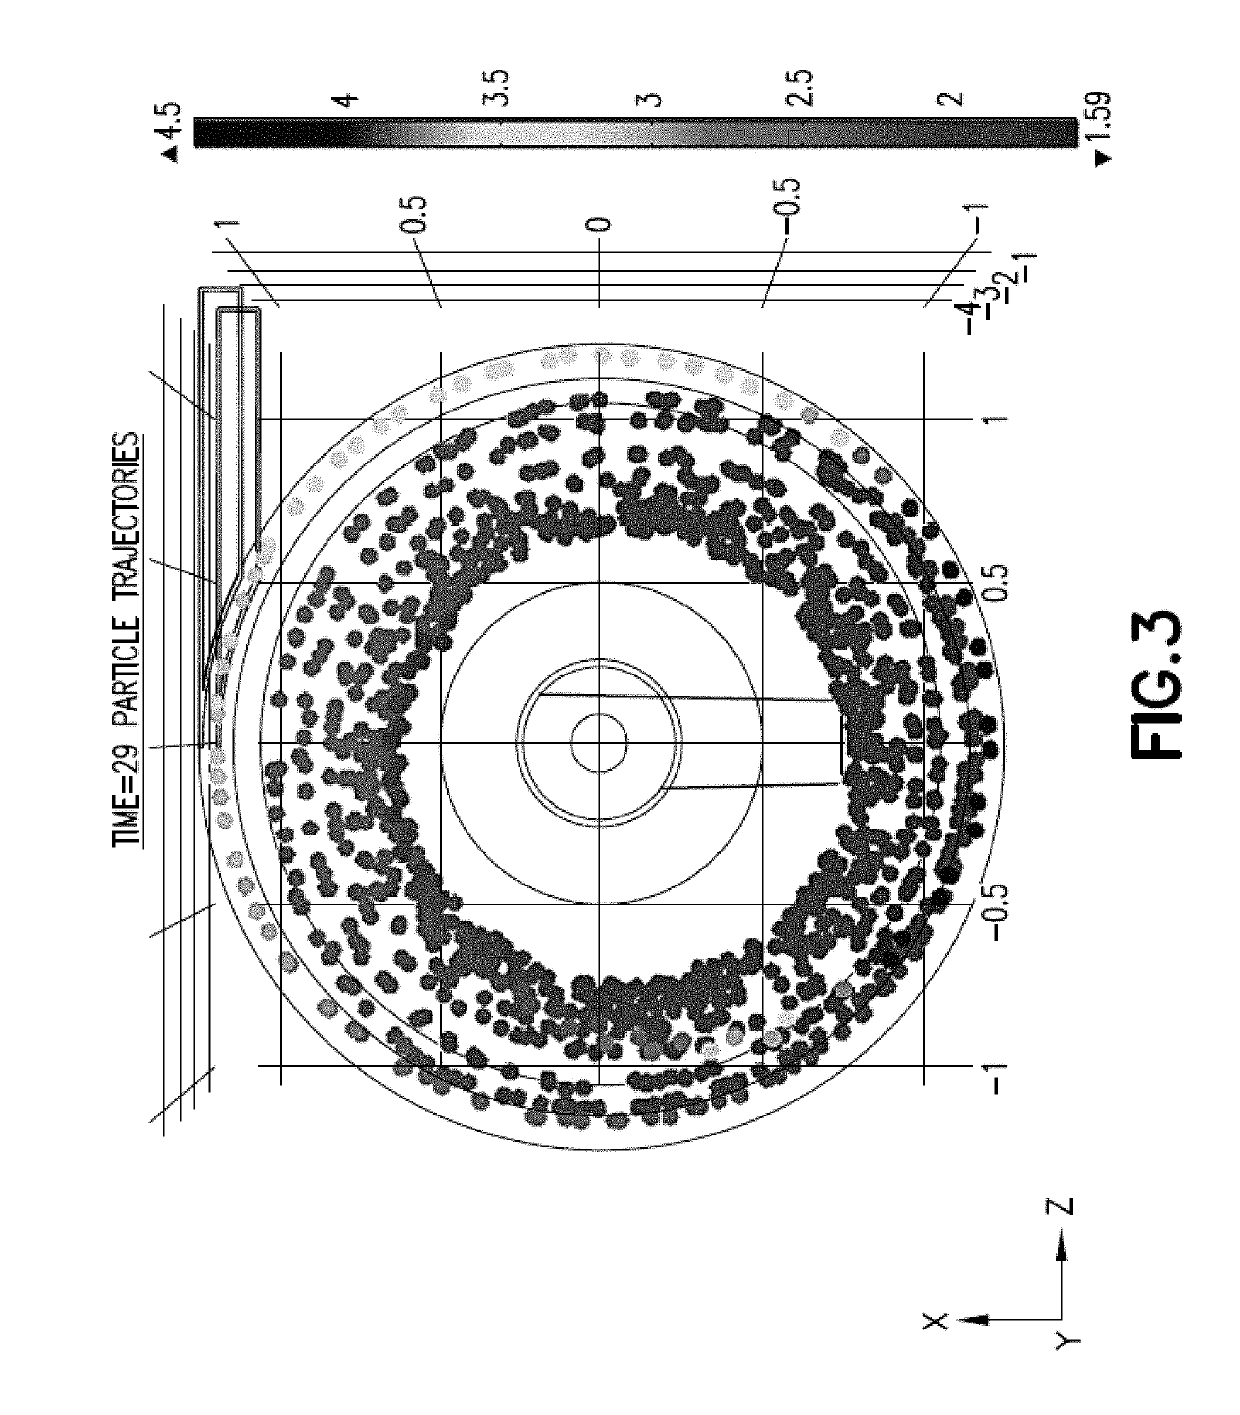 Ultrahigh efficiency spray drying apparatus and process